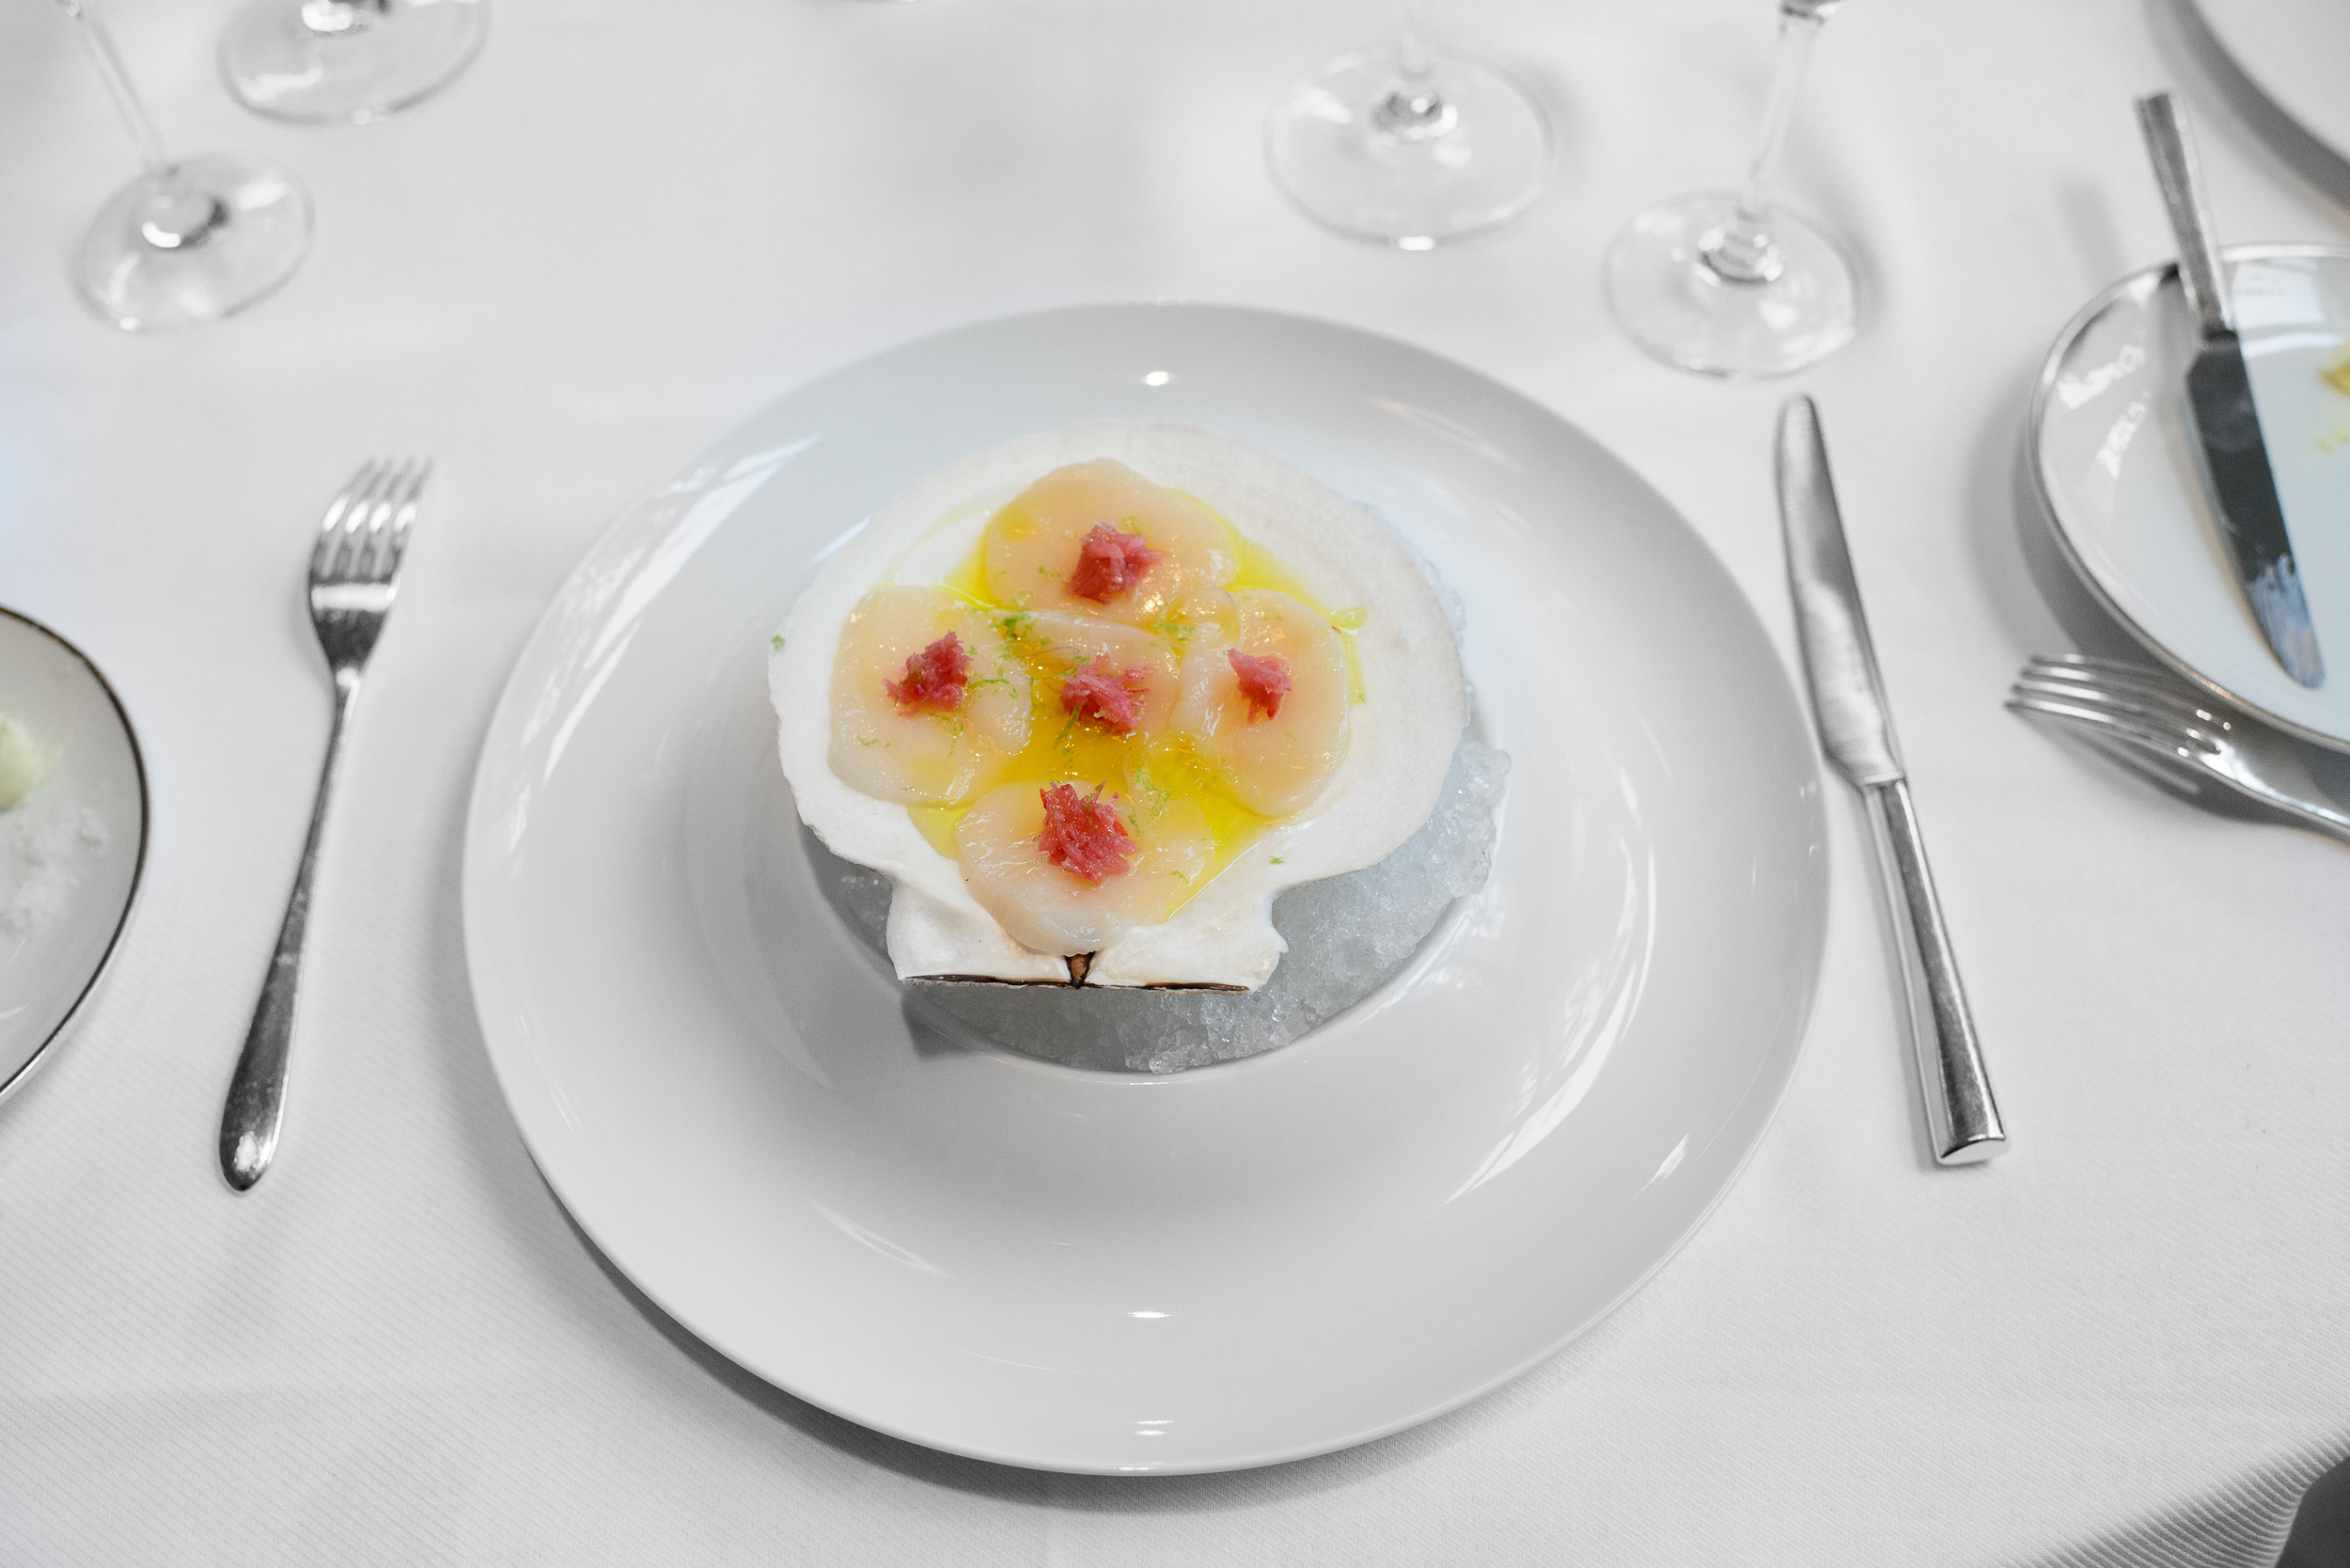 Scallop carpaccio with rhubarb, ginger, and olve oil